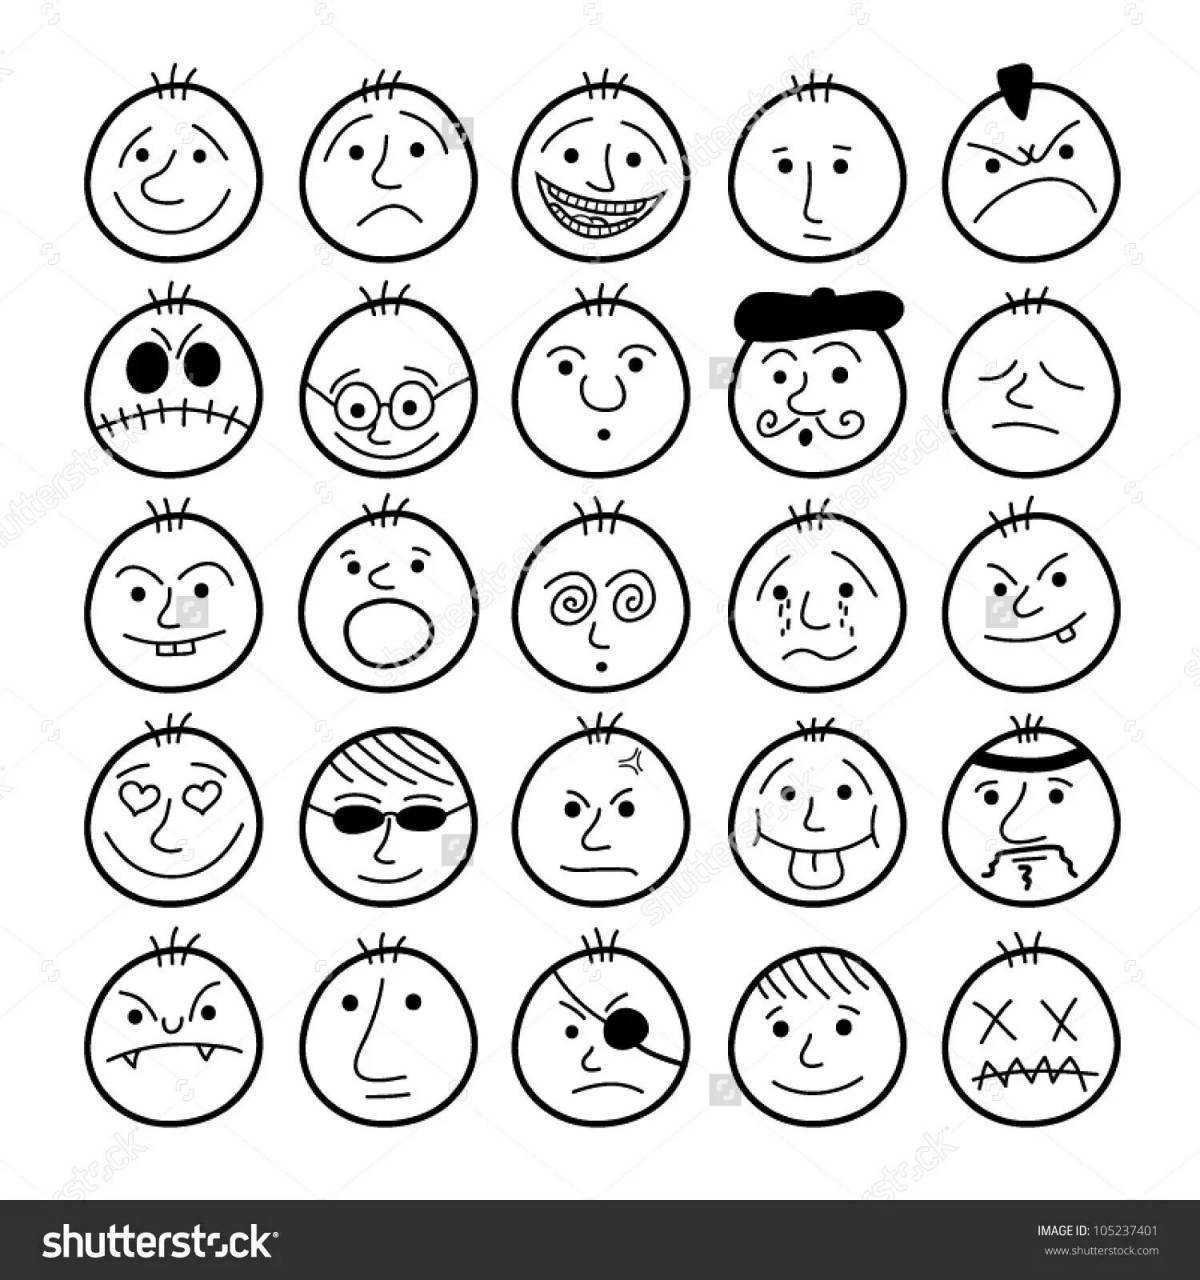 Furious smiley coloring page